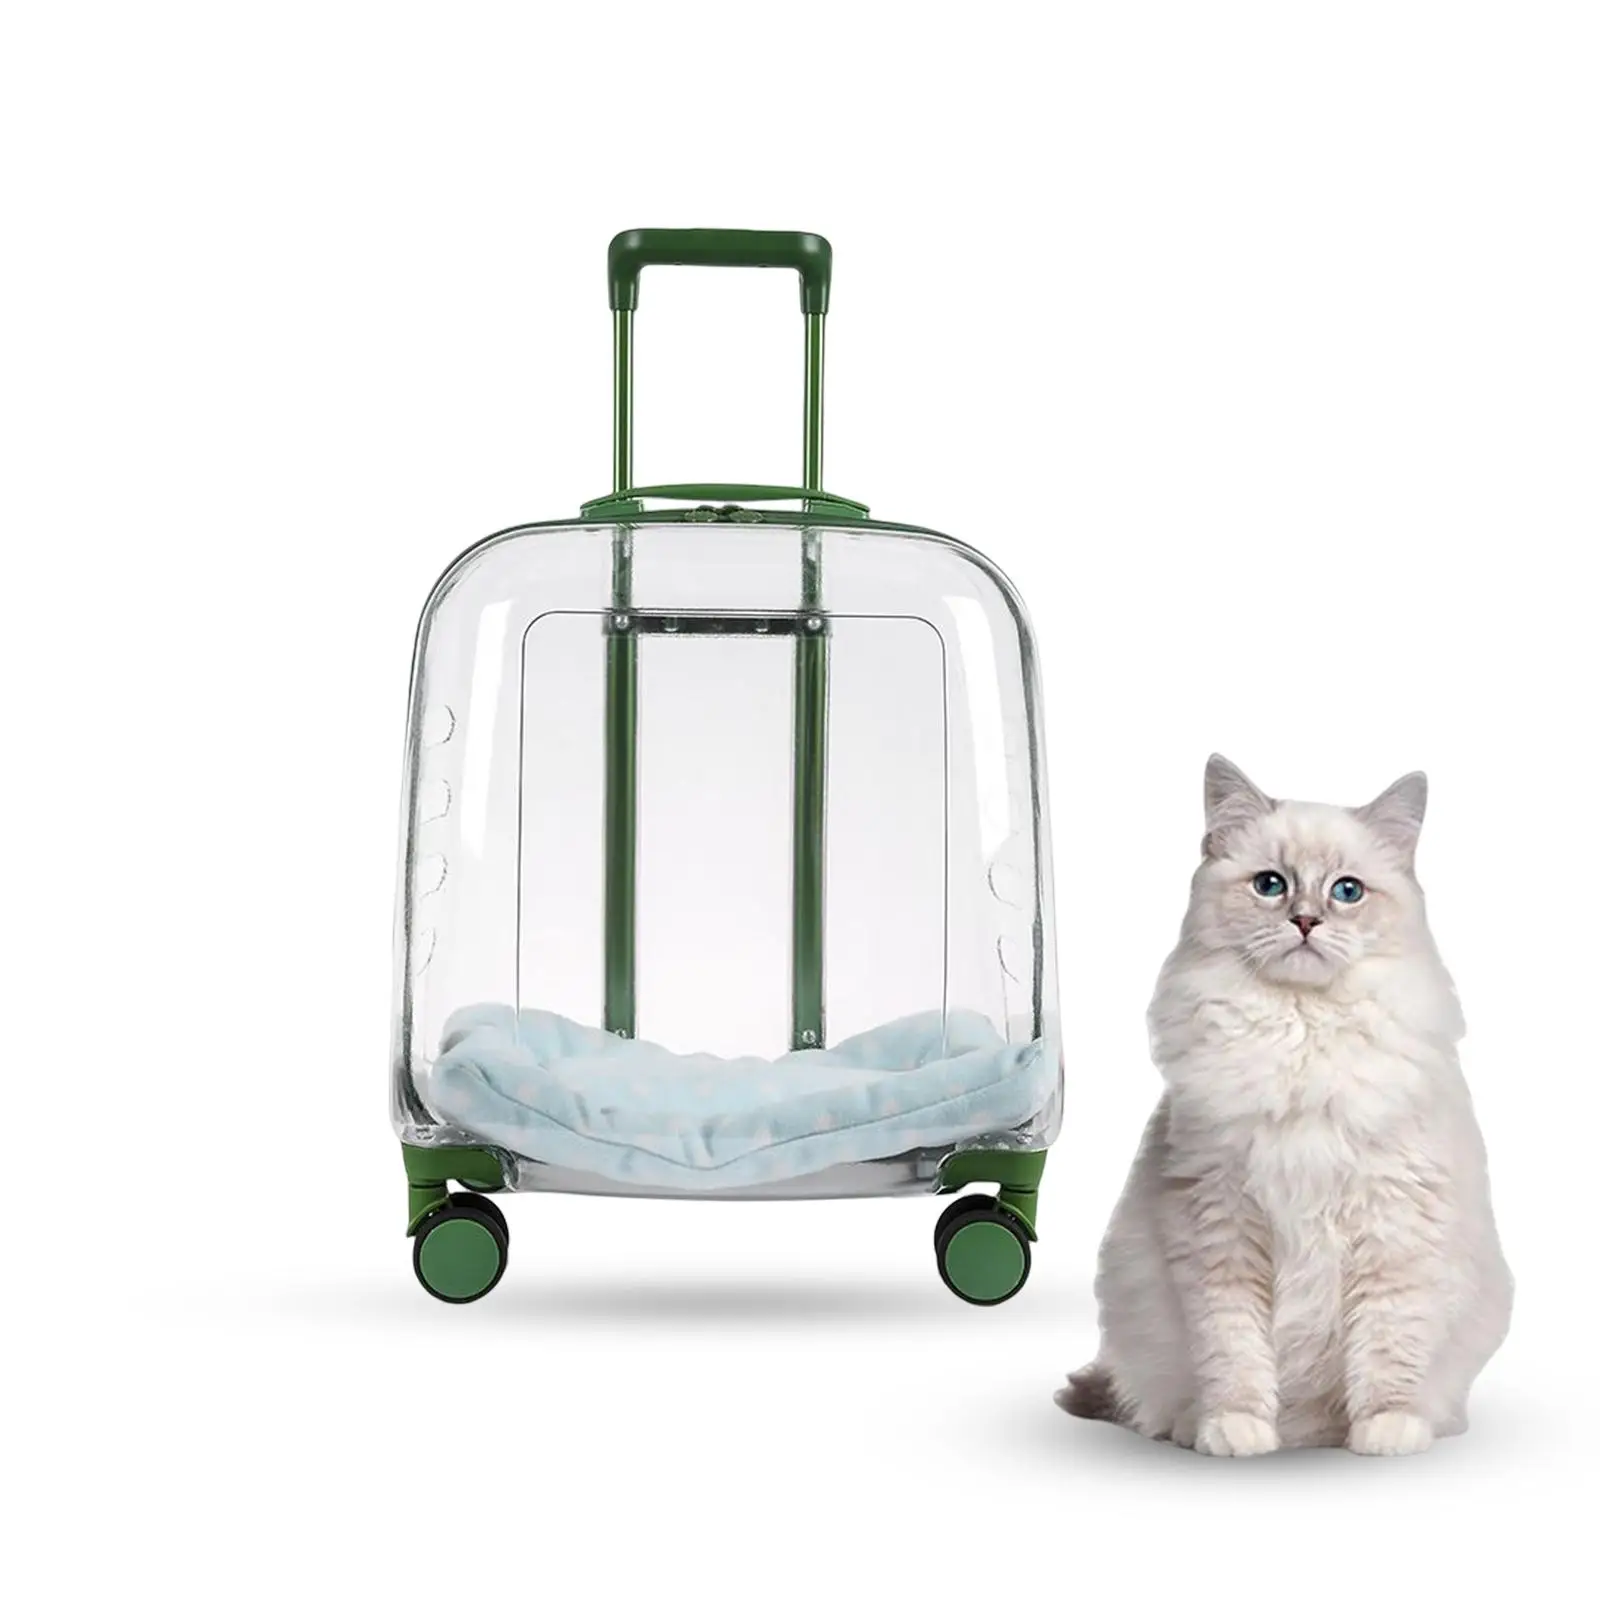 Pet Trolley Case Cat Luggage Bag Breathable Holes Silent Multifunctional Luggage Handbag for Cats Dogs Travel Outdoor Camping